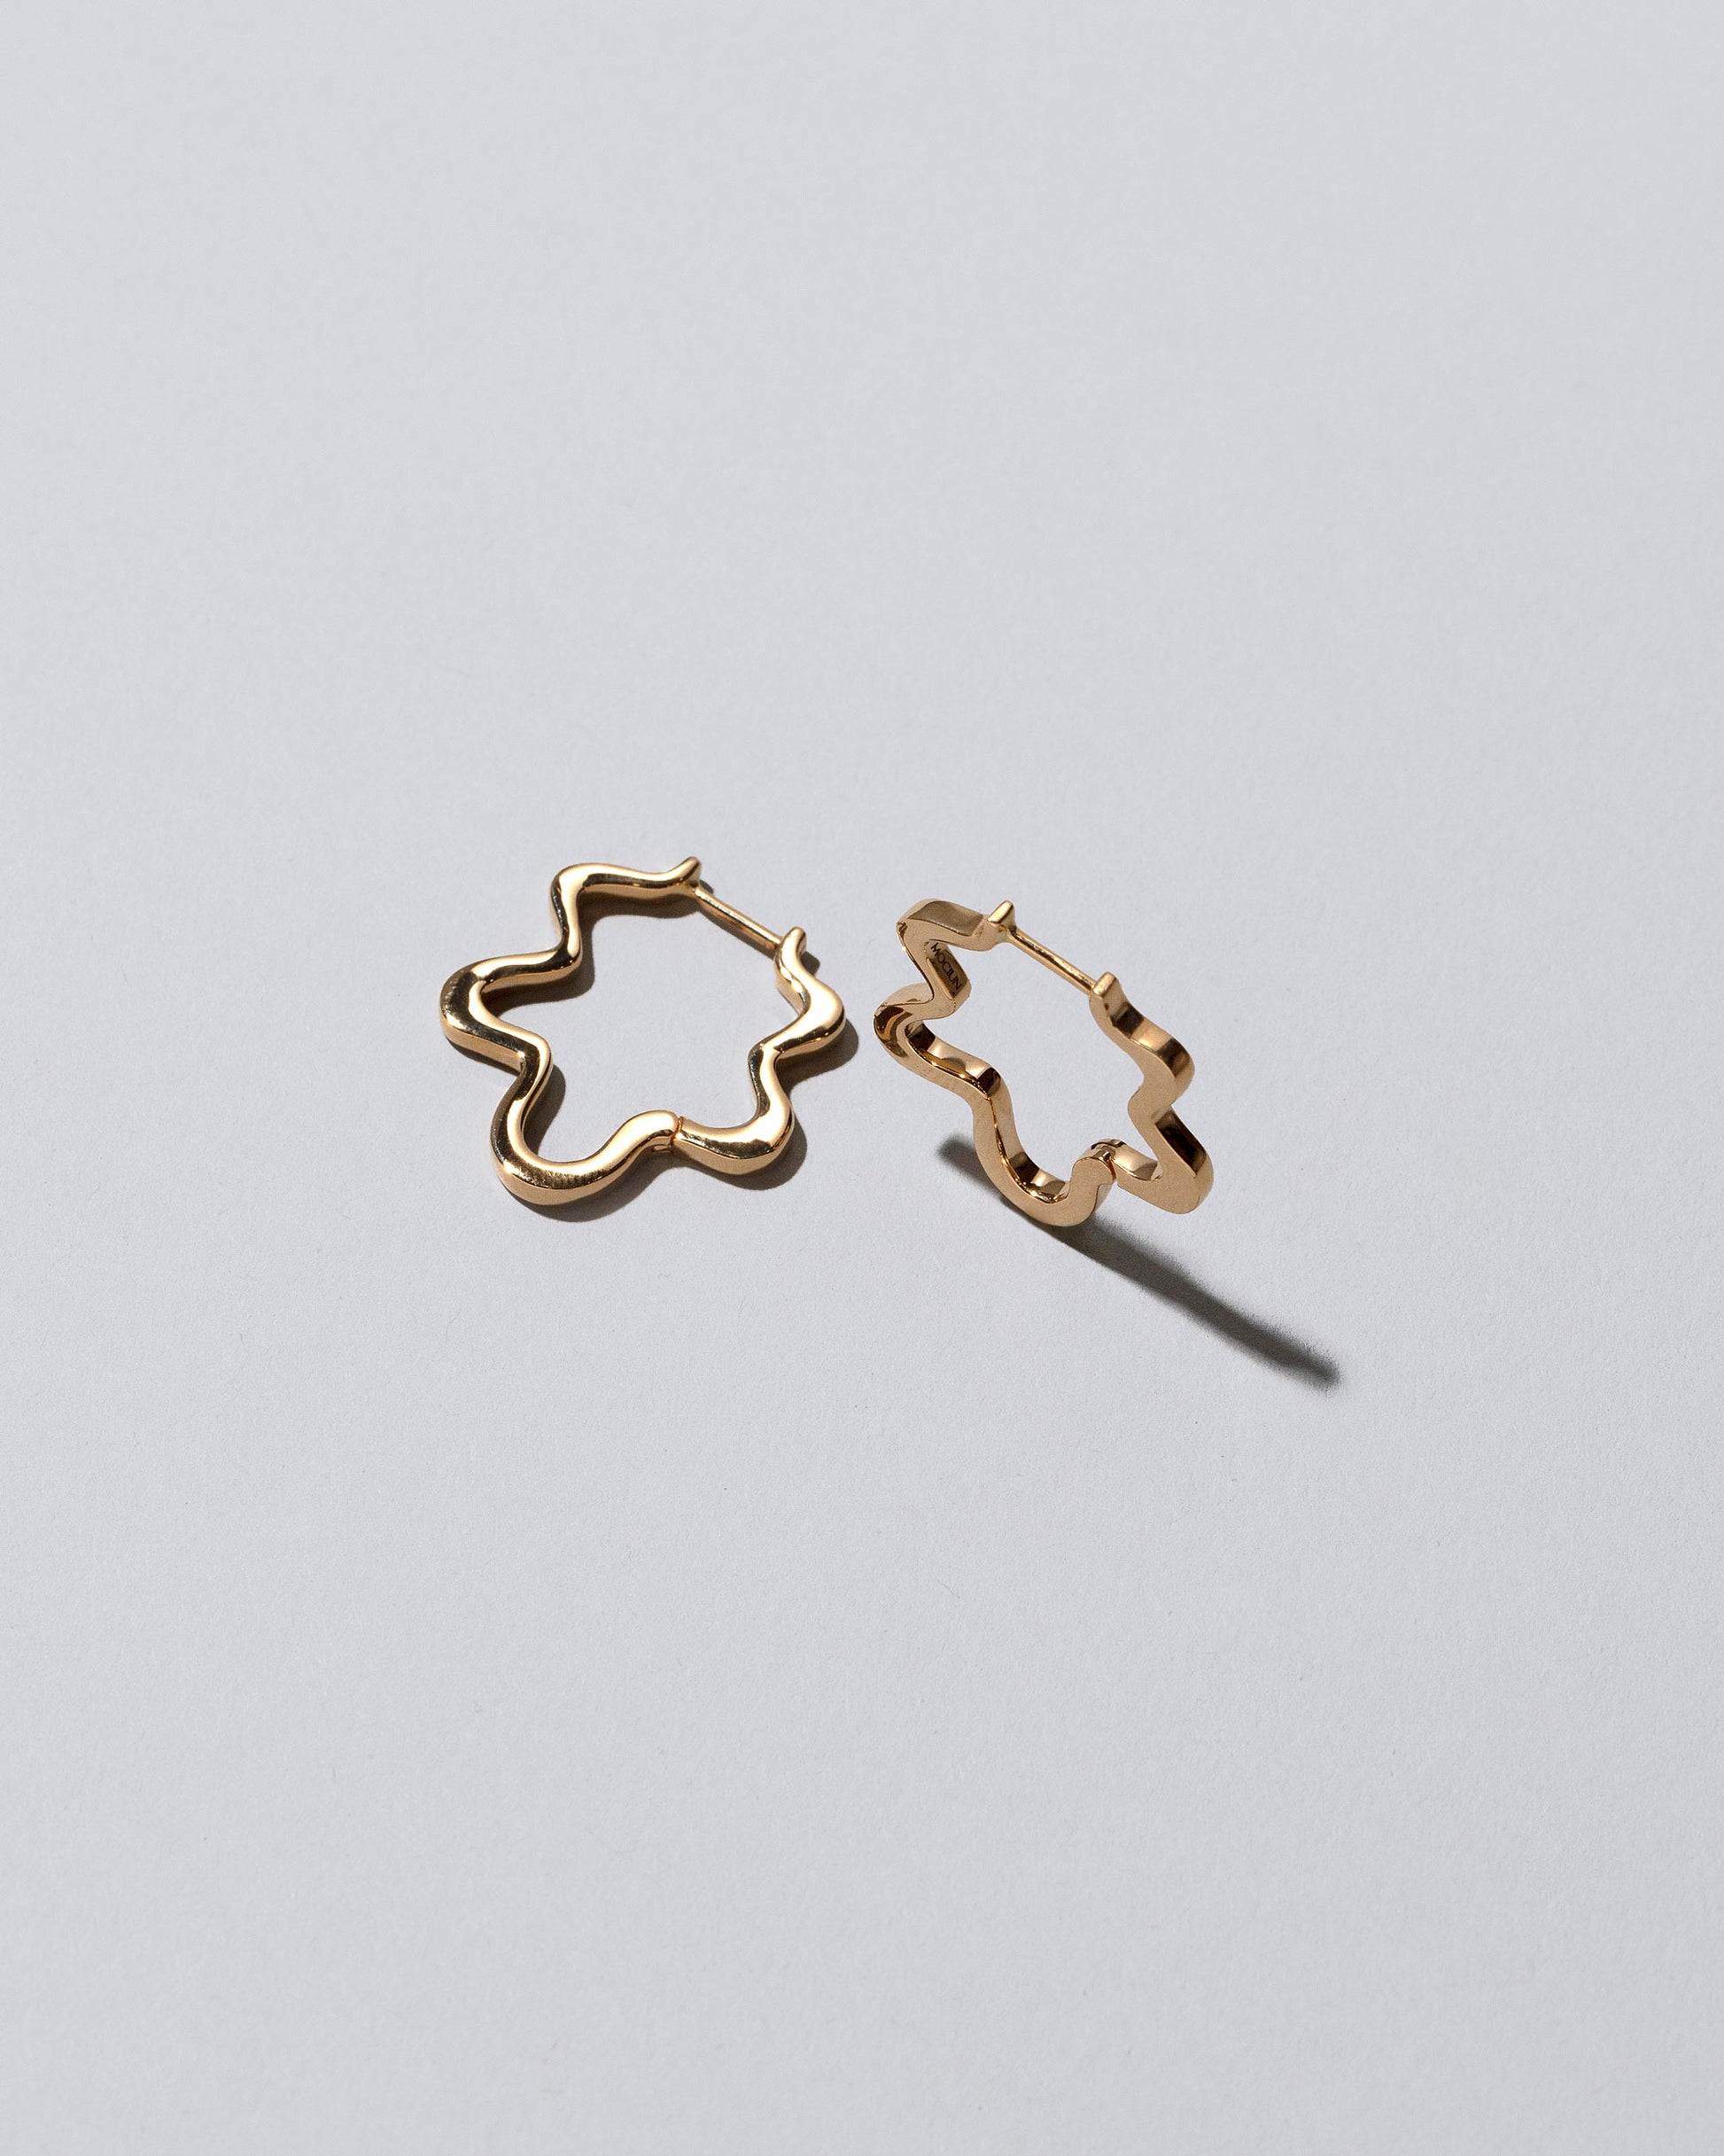 Closeup details of the Gold Wild Poppies Hoop Earrings on light color background.